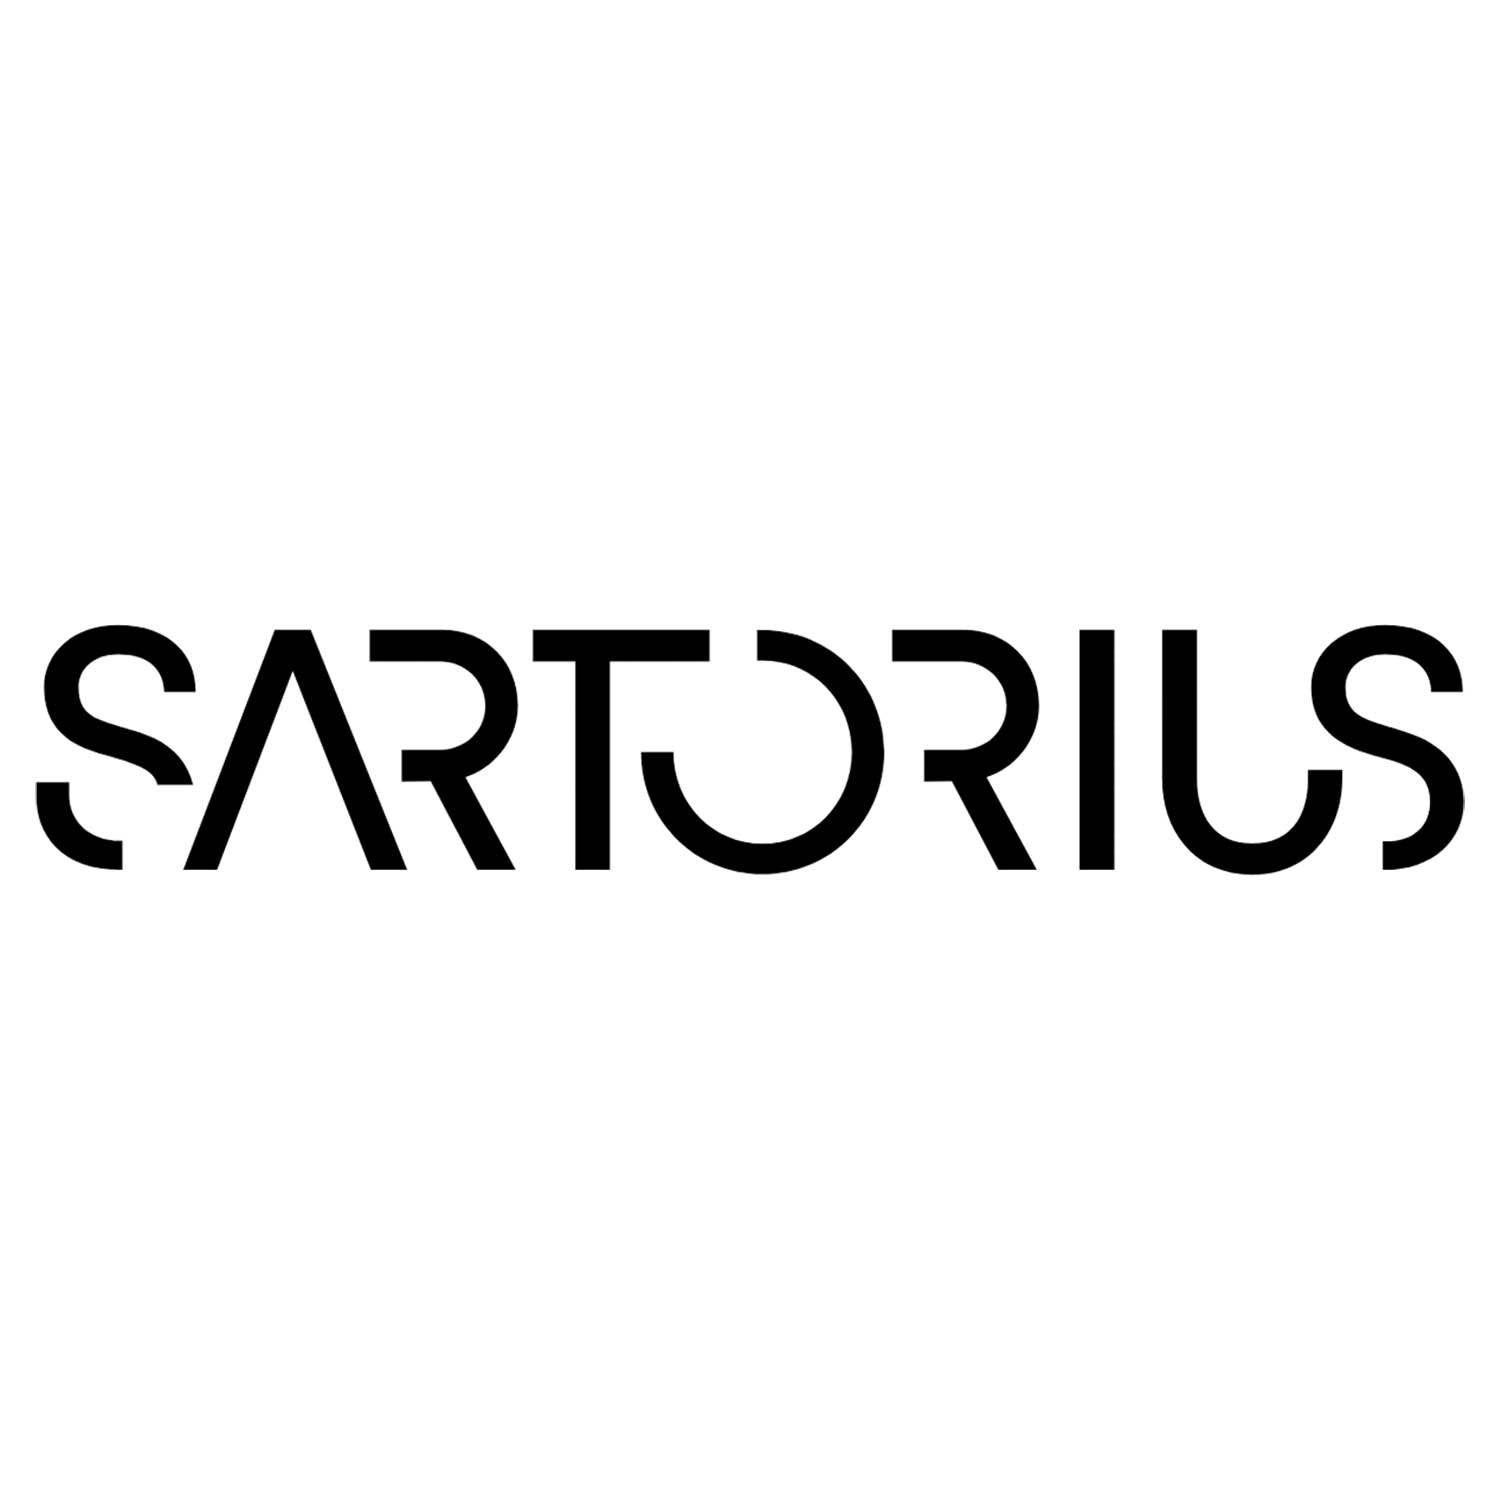 Sartorius FT-4-328-150, Technical Papers, Smooth/ Grade 100/N